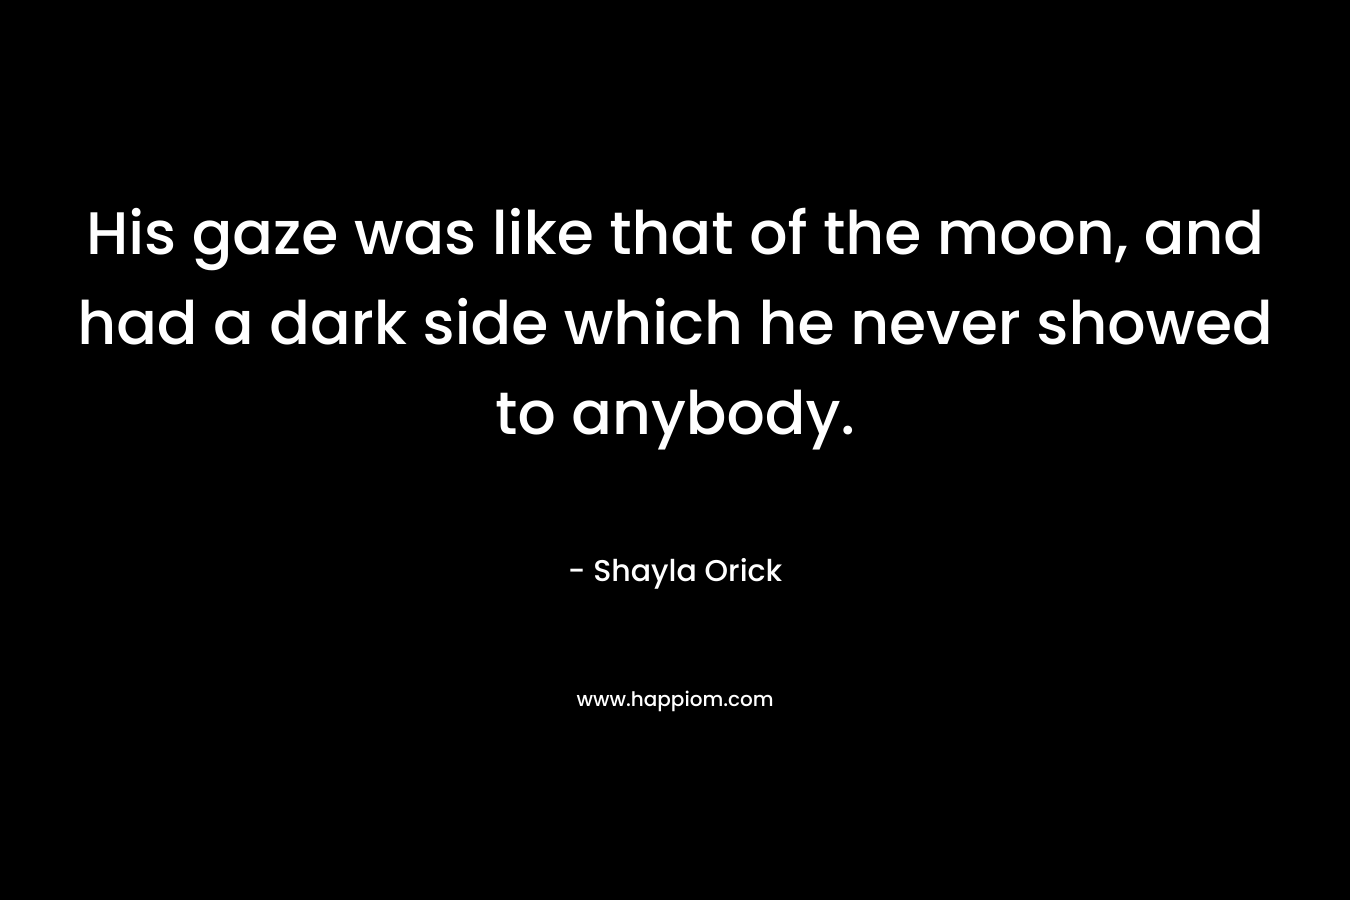 His gaze was like that of the moon, and had a dark side which he never showed to anybody. – Shayla Orick